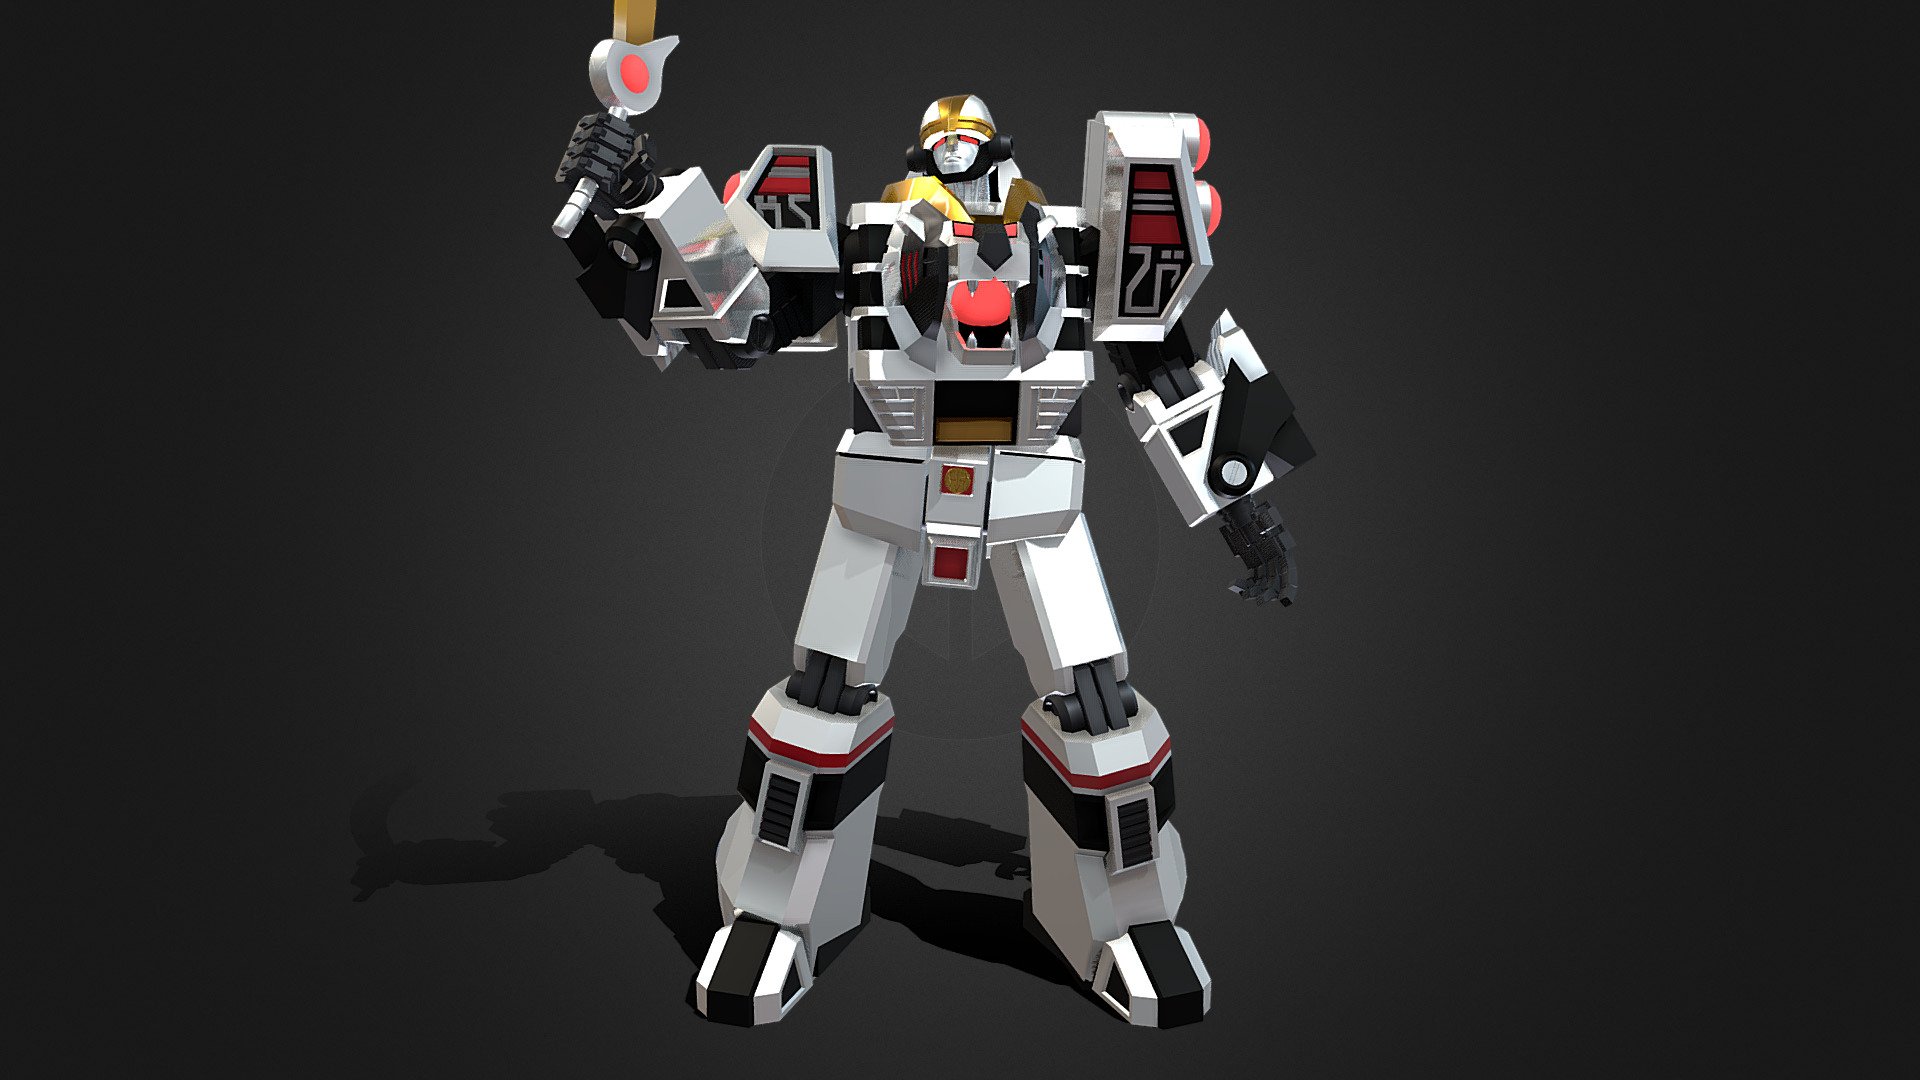 If you’re interested in purchasing any of my models, contact me @ andrewdisaacs@yahoo.com

The mecha from Mighty Morphin Power Rangers.

Made in 3DS Max by myself 3d model